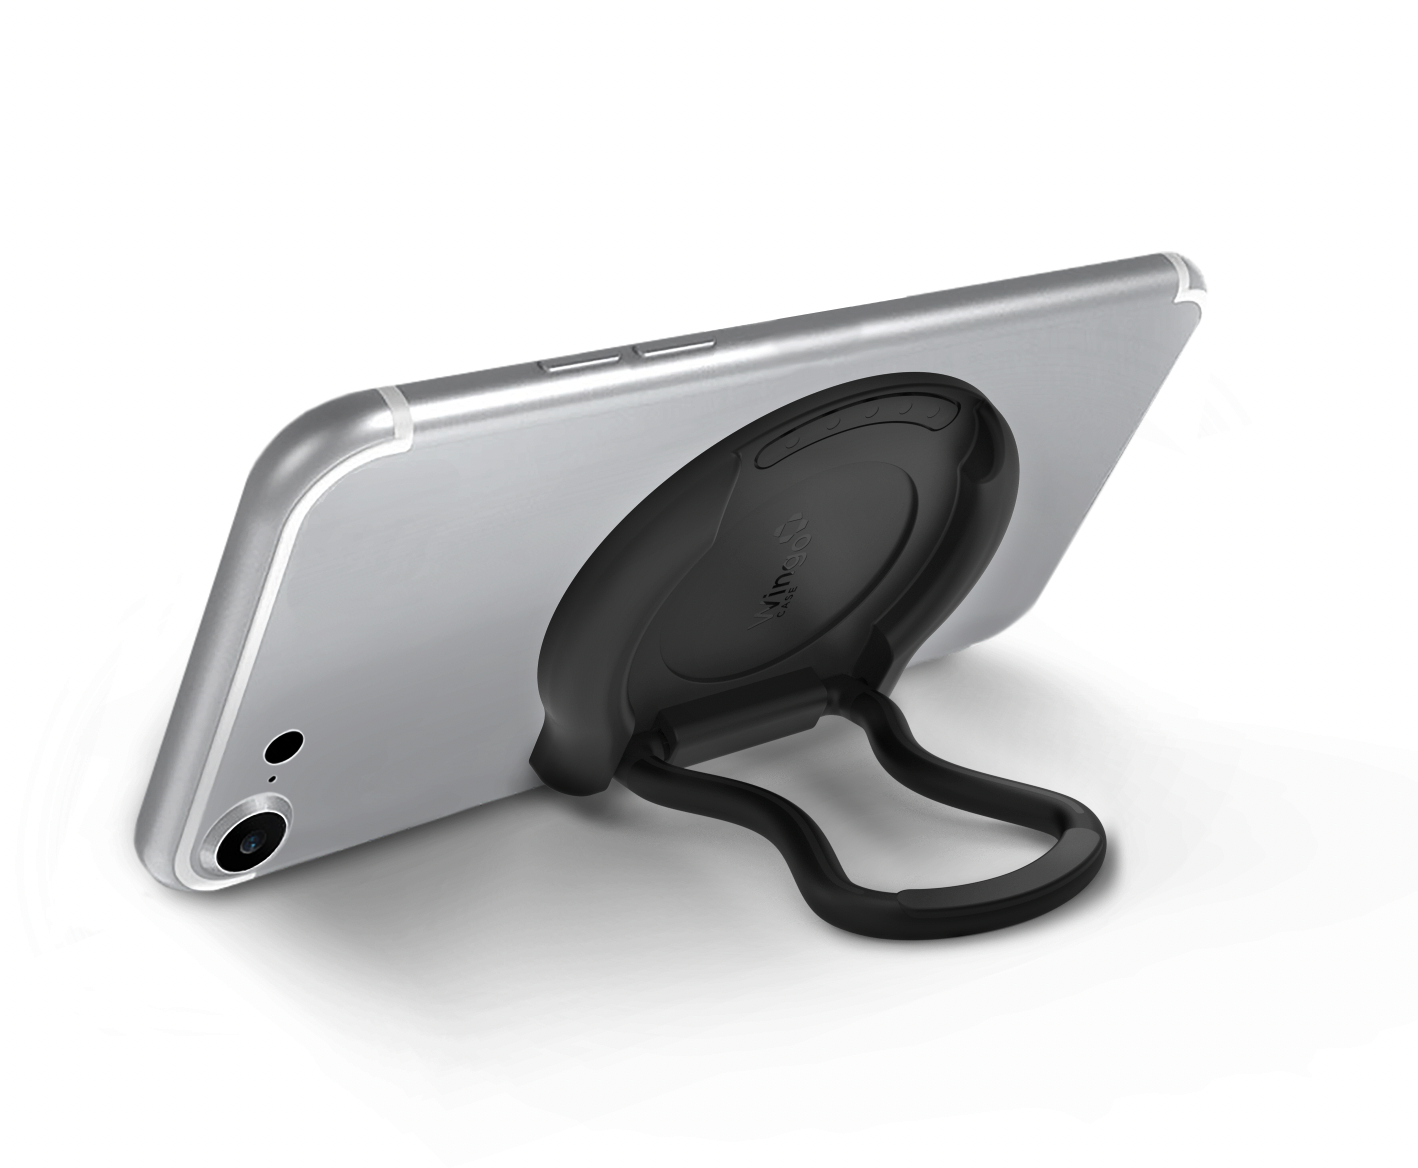 The Perch - Your Essential iPhone Phone Grip Accessory – WingoCase